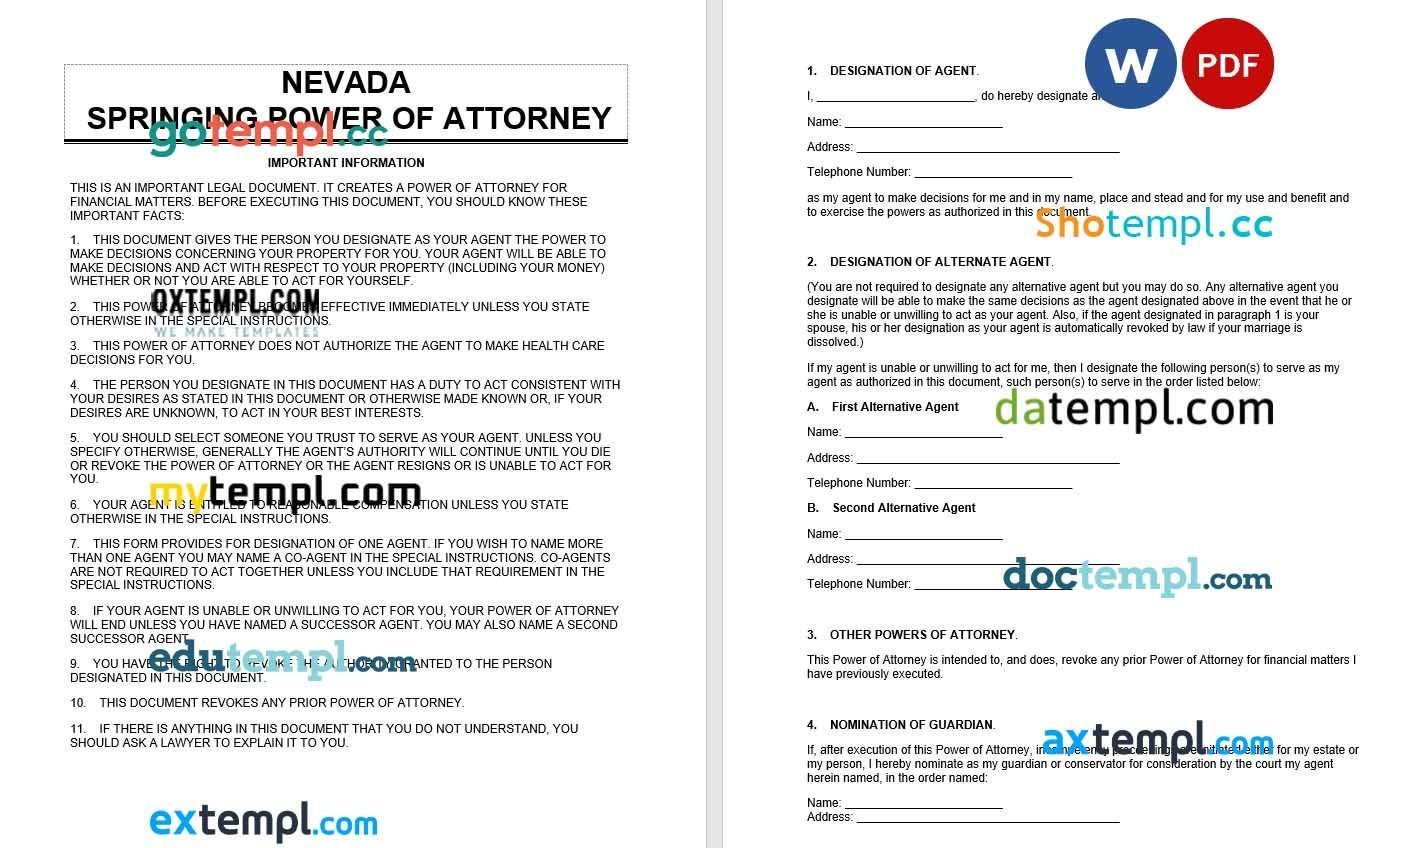 Nevada Springing Power of Attorney example, fully editable